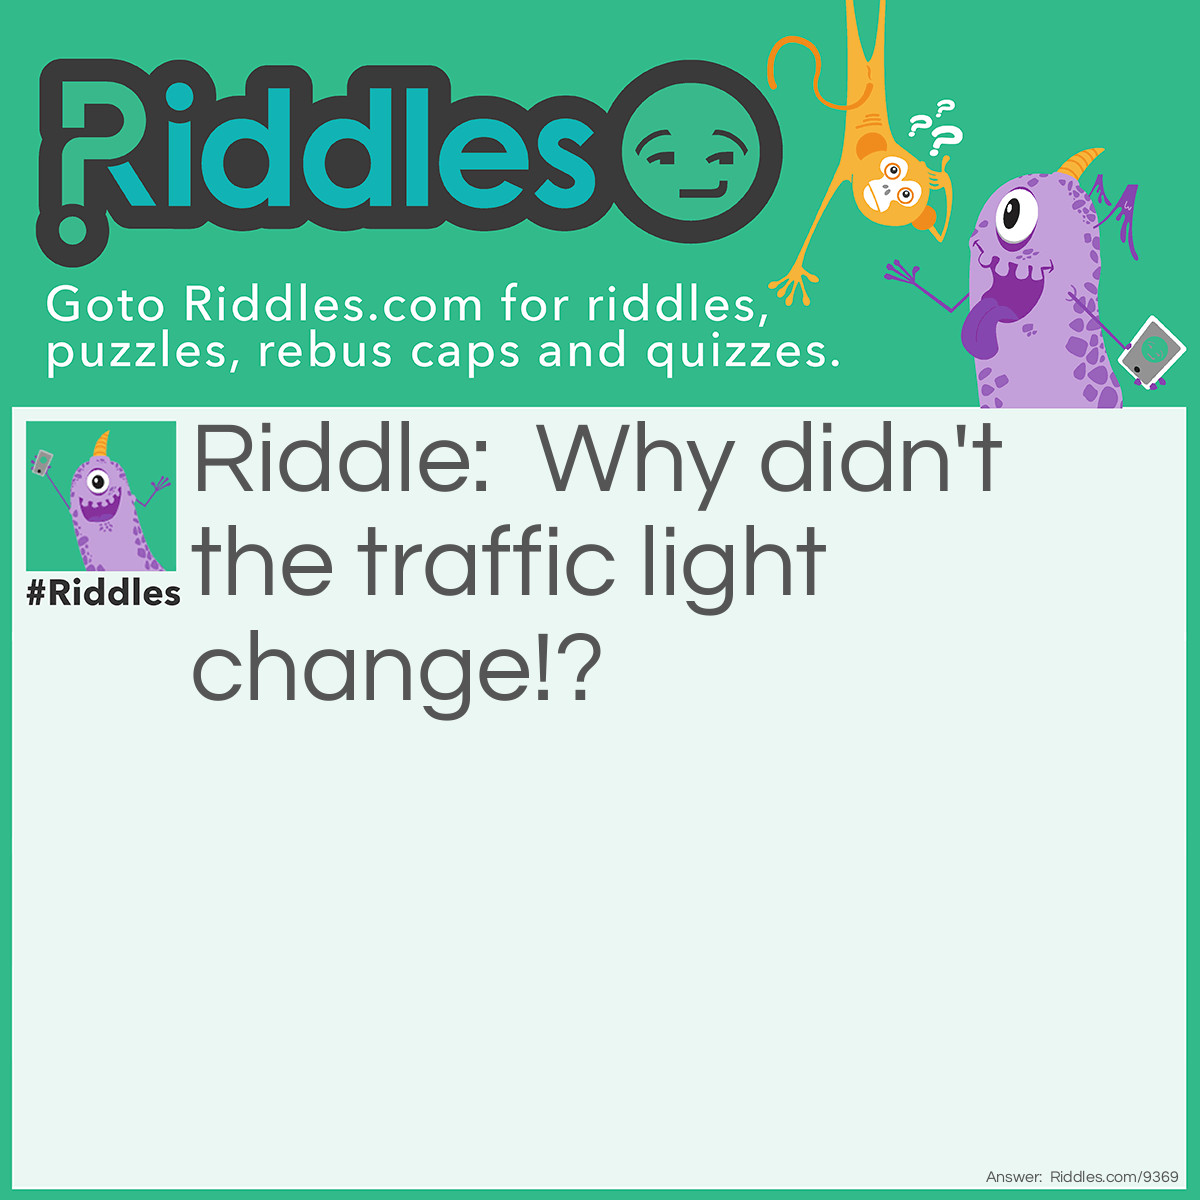 Riddle: Why didn't the traffic light change!? Answer: It couldn't change in front of all those people.